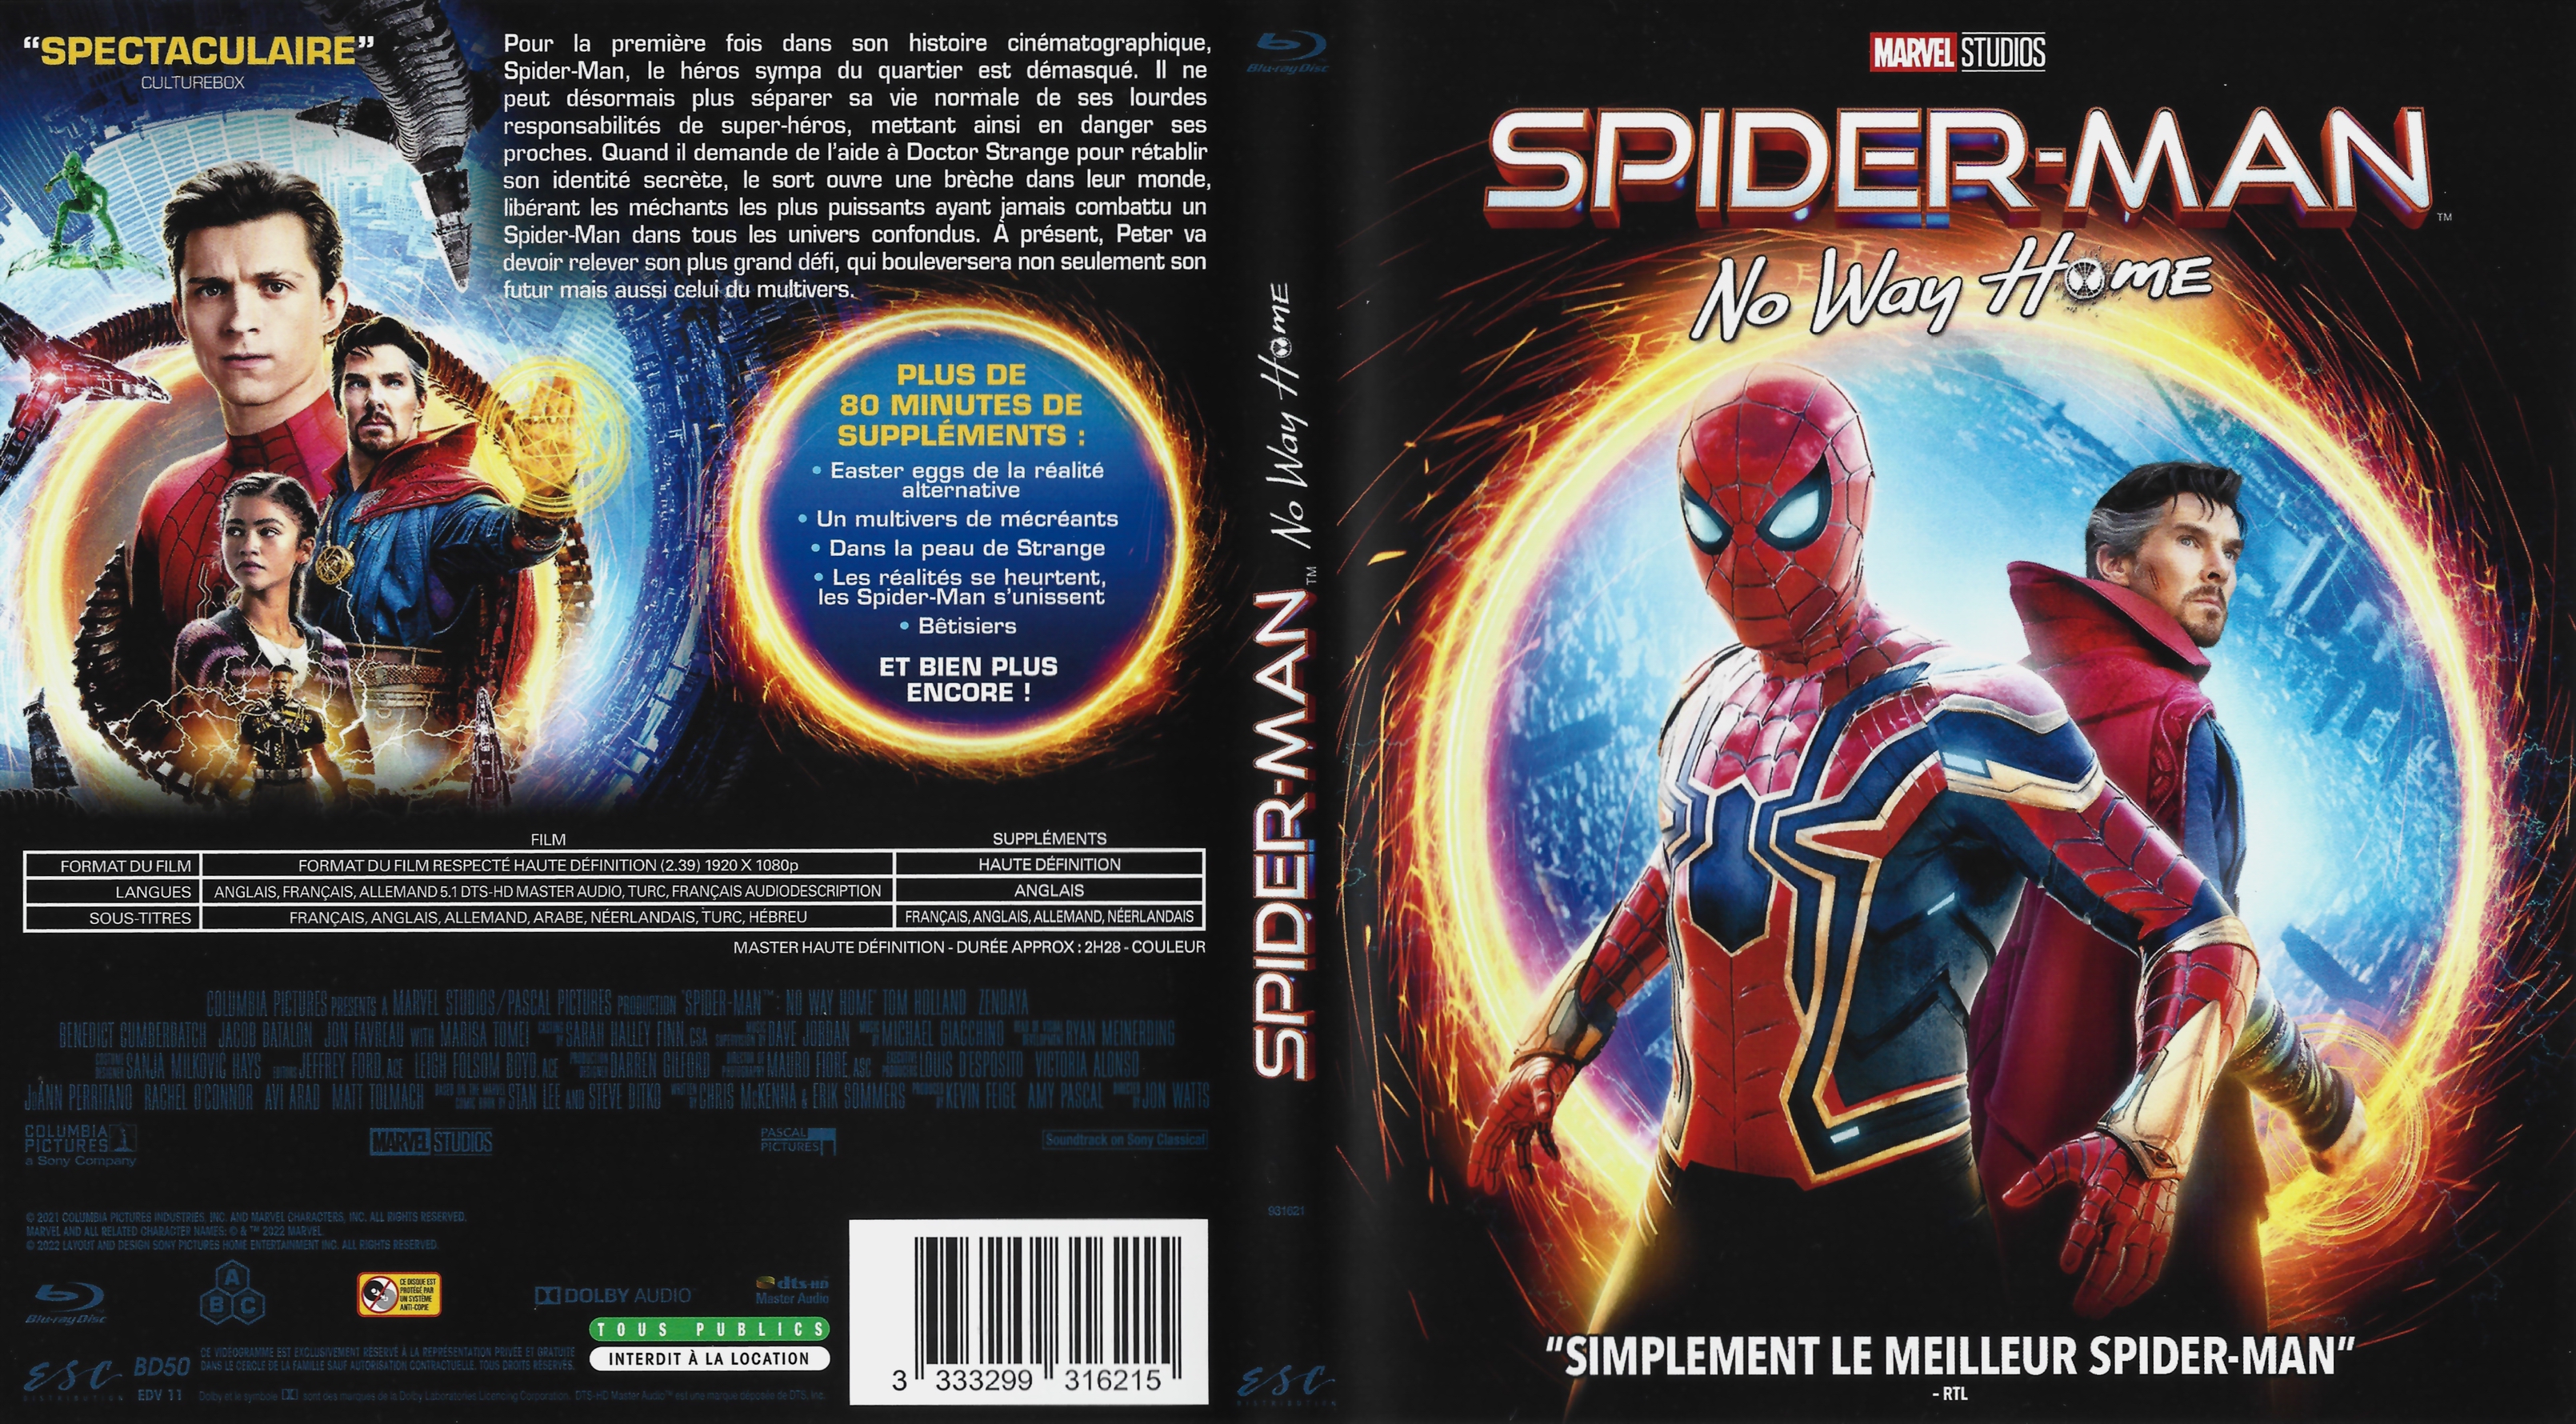 Jaquette DVD Spider-man no way home (BLU-RAY)